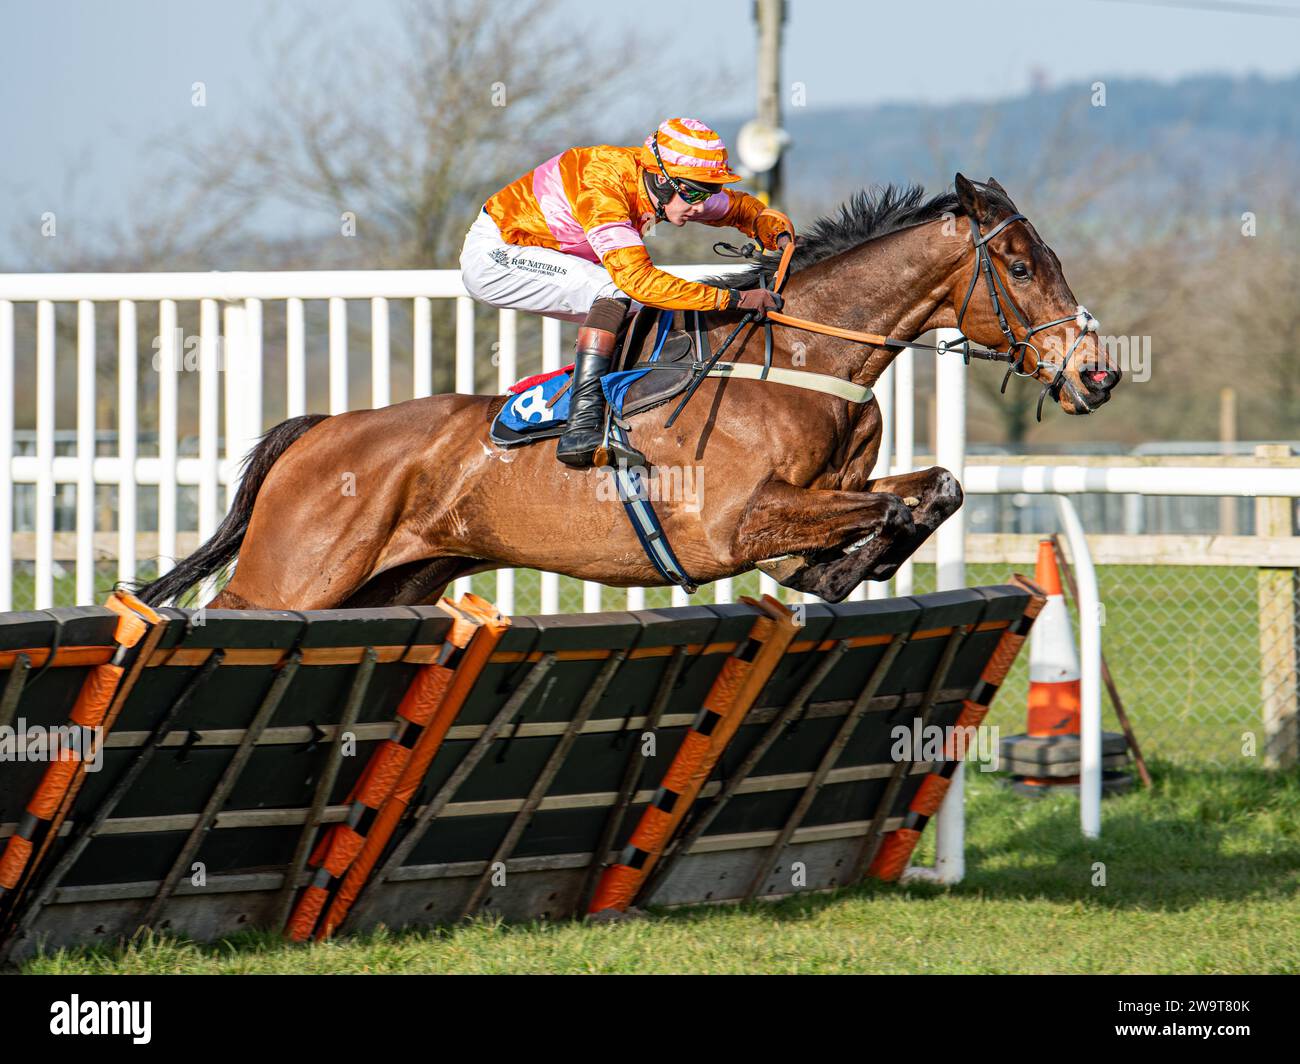 Name in Lights, under jockey Brendan Powell, clears the hurdle to go on and win the 4th race at Wincanton, March 21st 2022. Trained by Colin Tizzard. Stock Photo